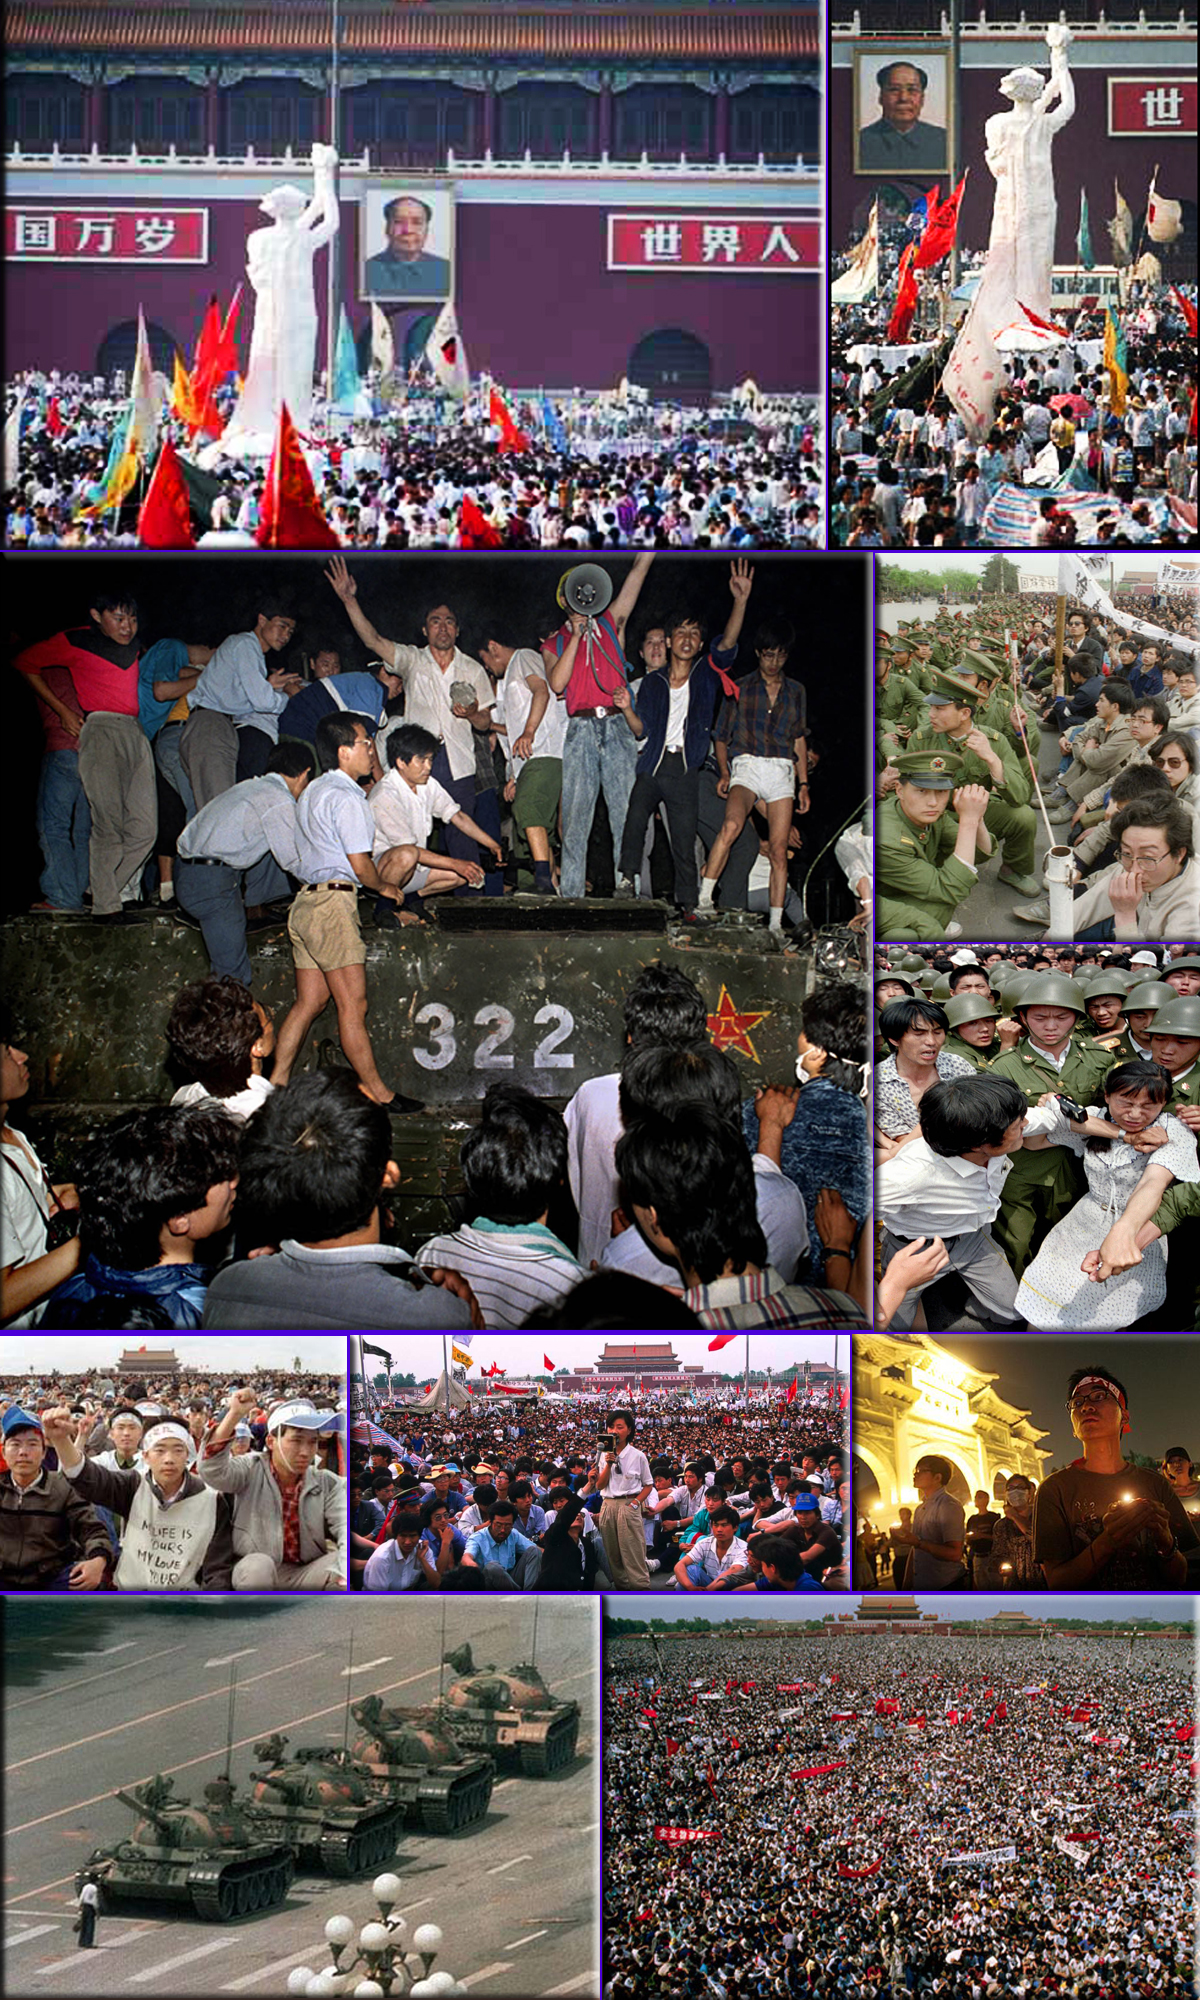 In the People's Republic of China, the April Fifth Movement leads to the Tiananmen incident